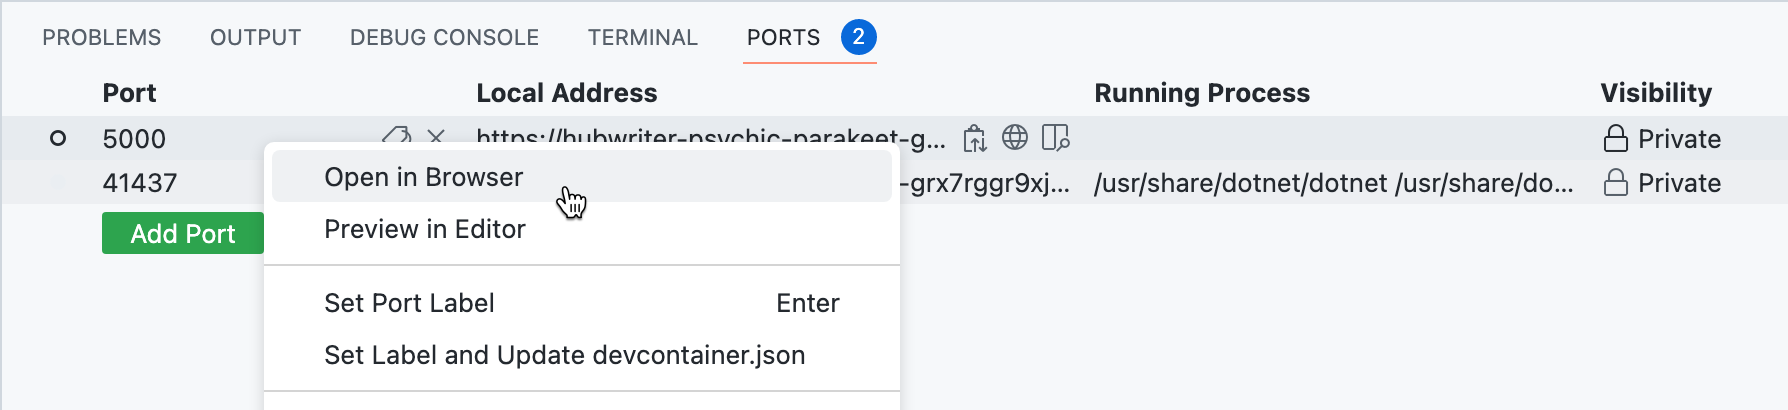 Screenshot of the "Ports" tab, showing the right-click menu with the cursor pointer pointing to the "Open in Browser" option.